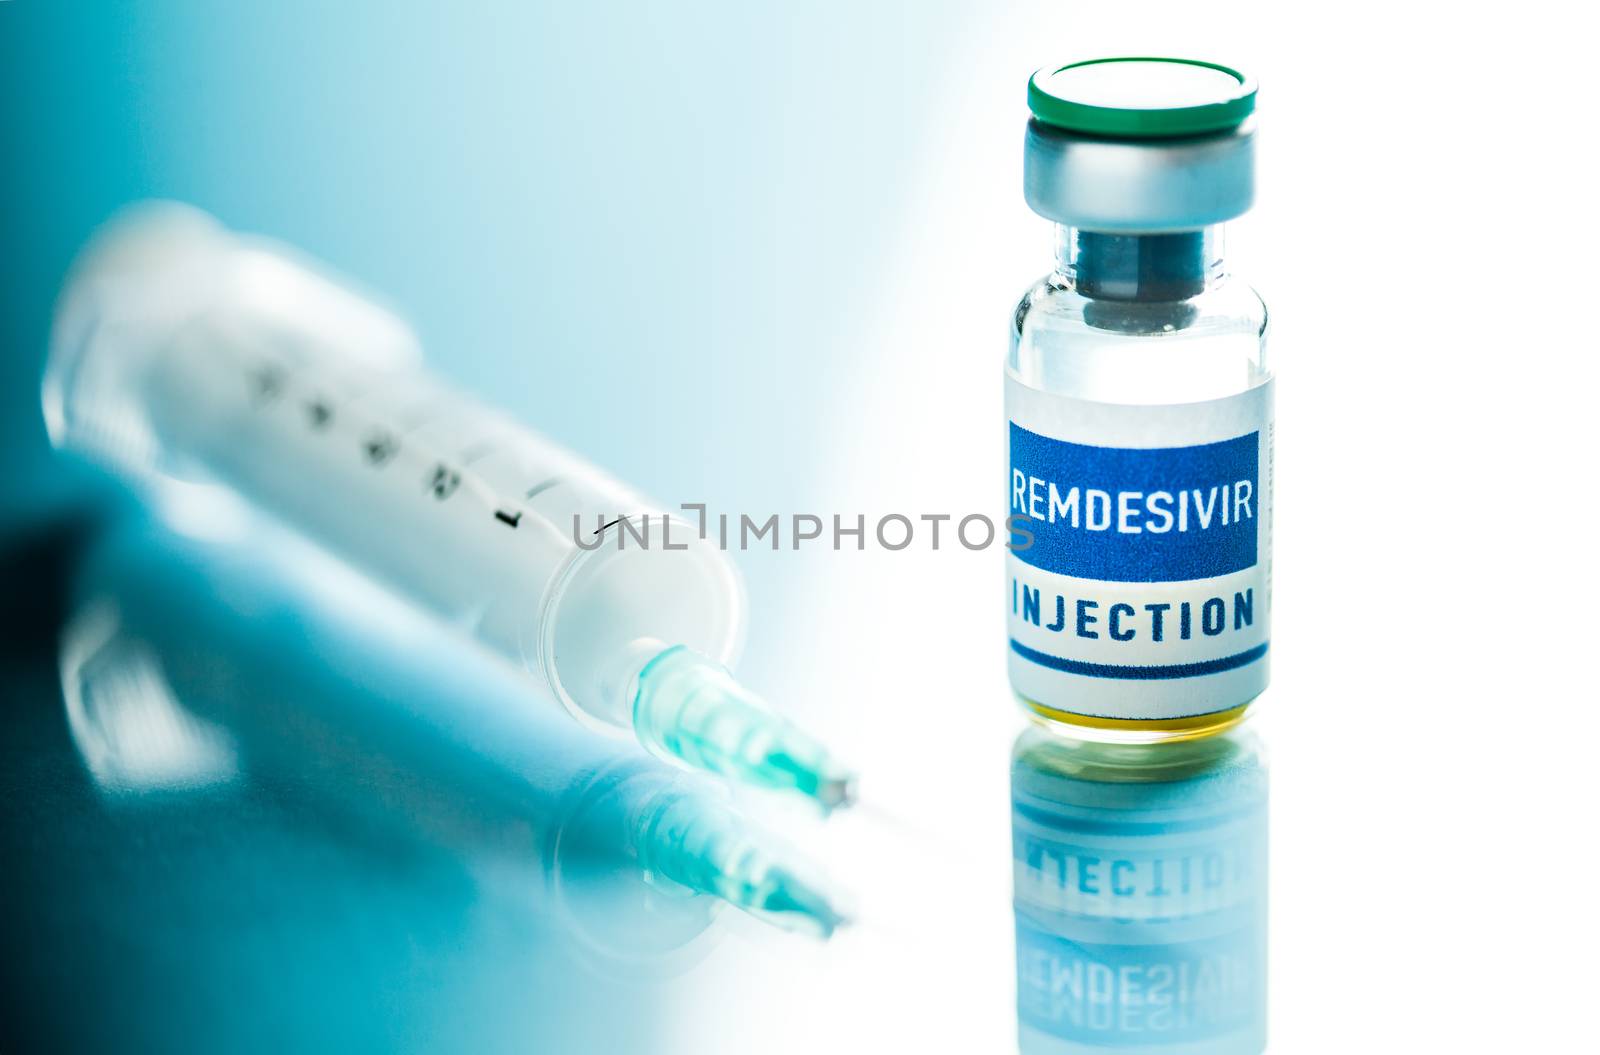 REMDESIVIR injection ampoule with syringe & needle by Plyushkin